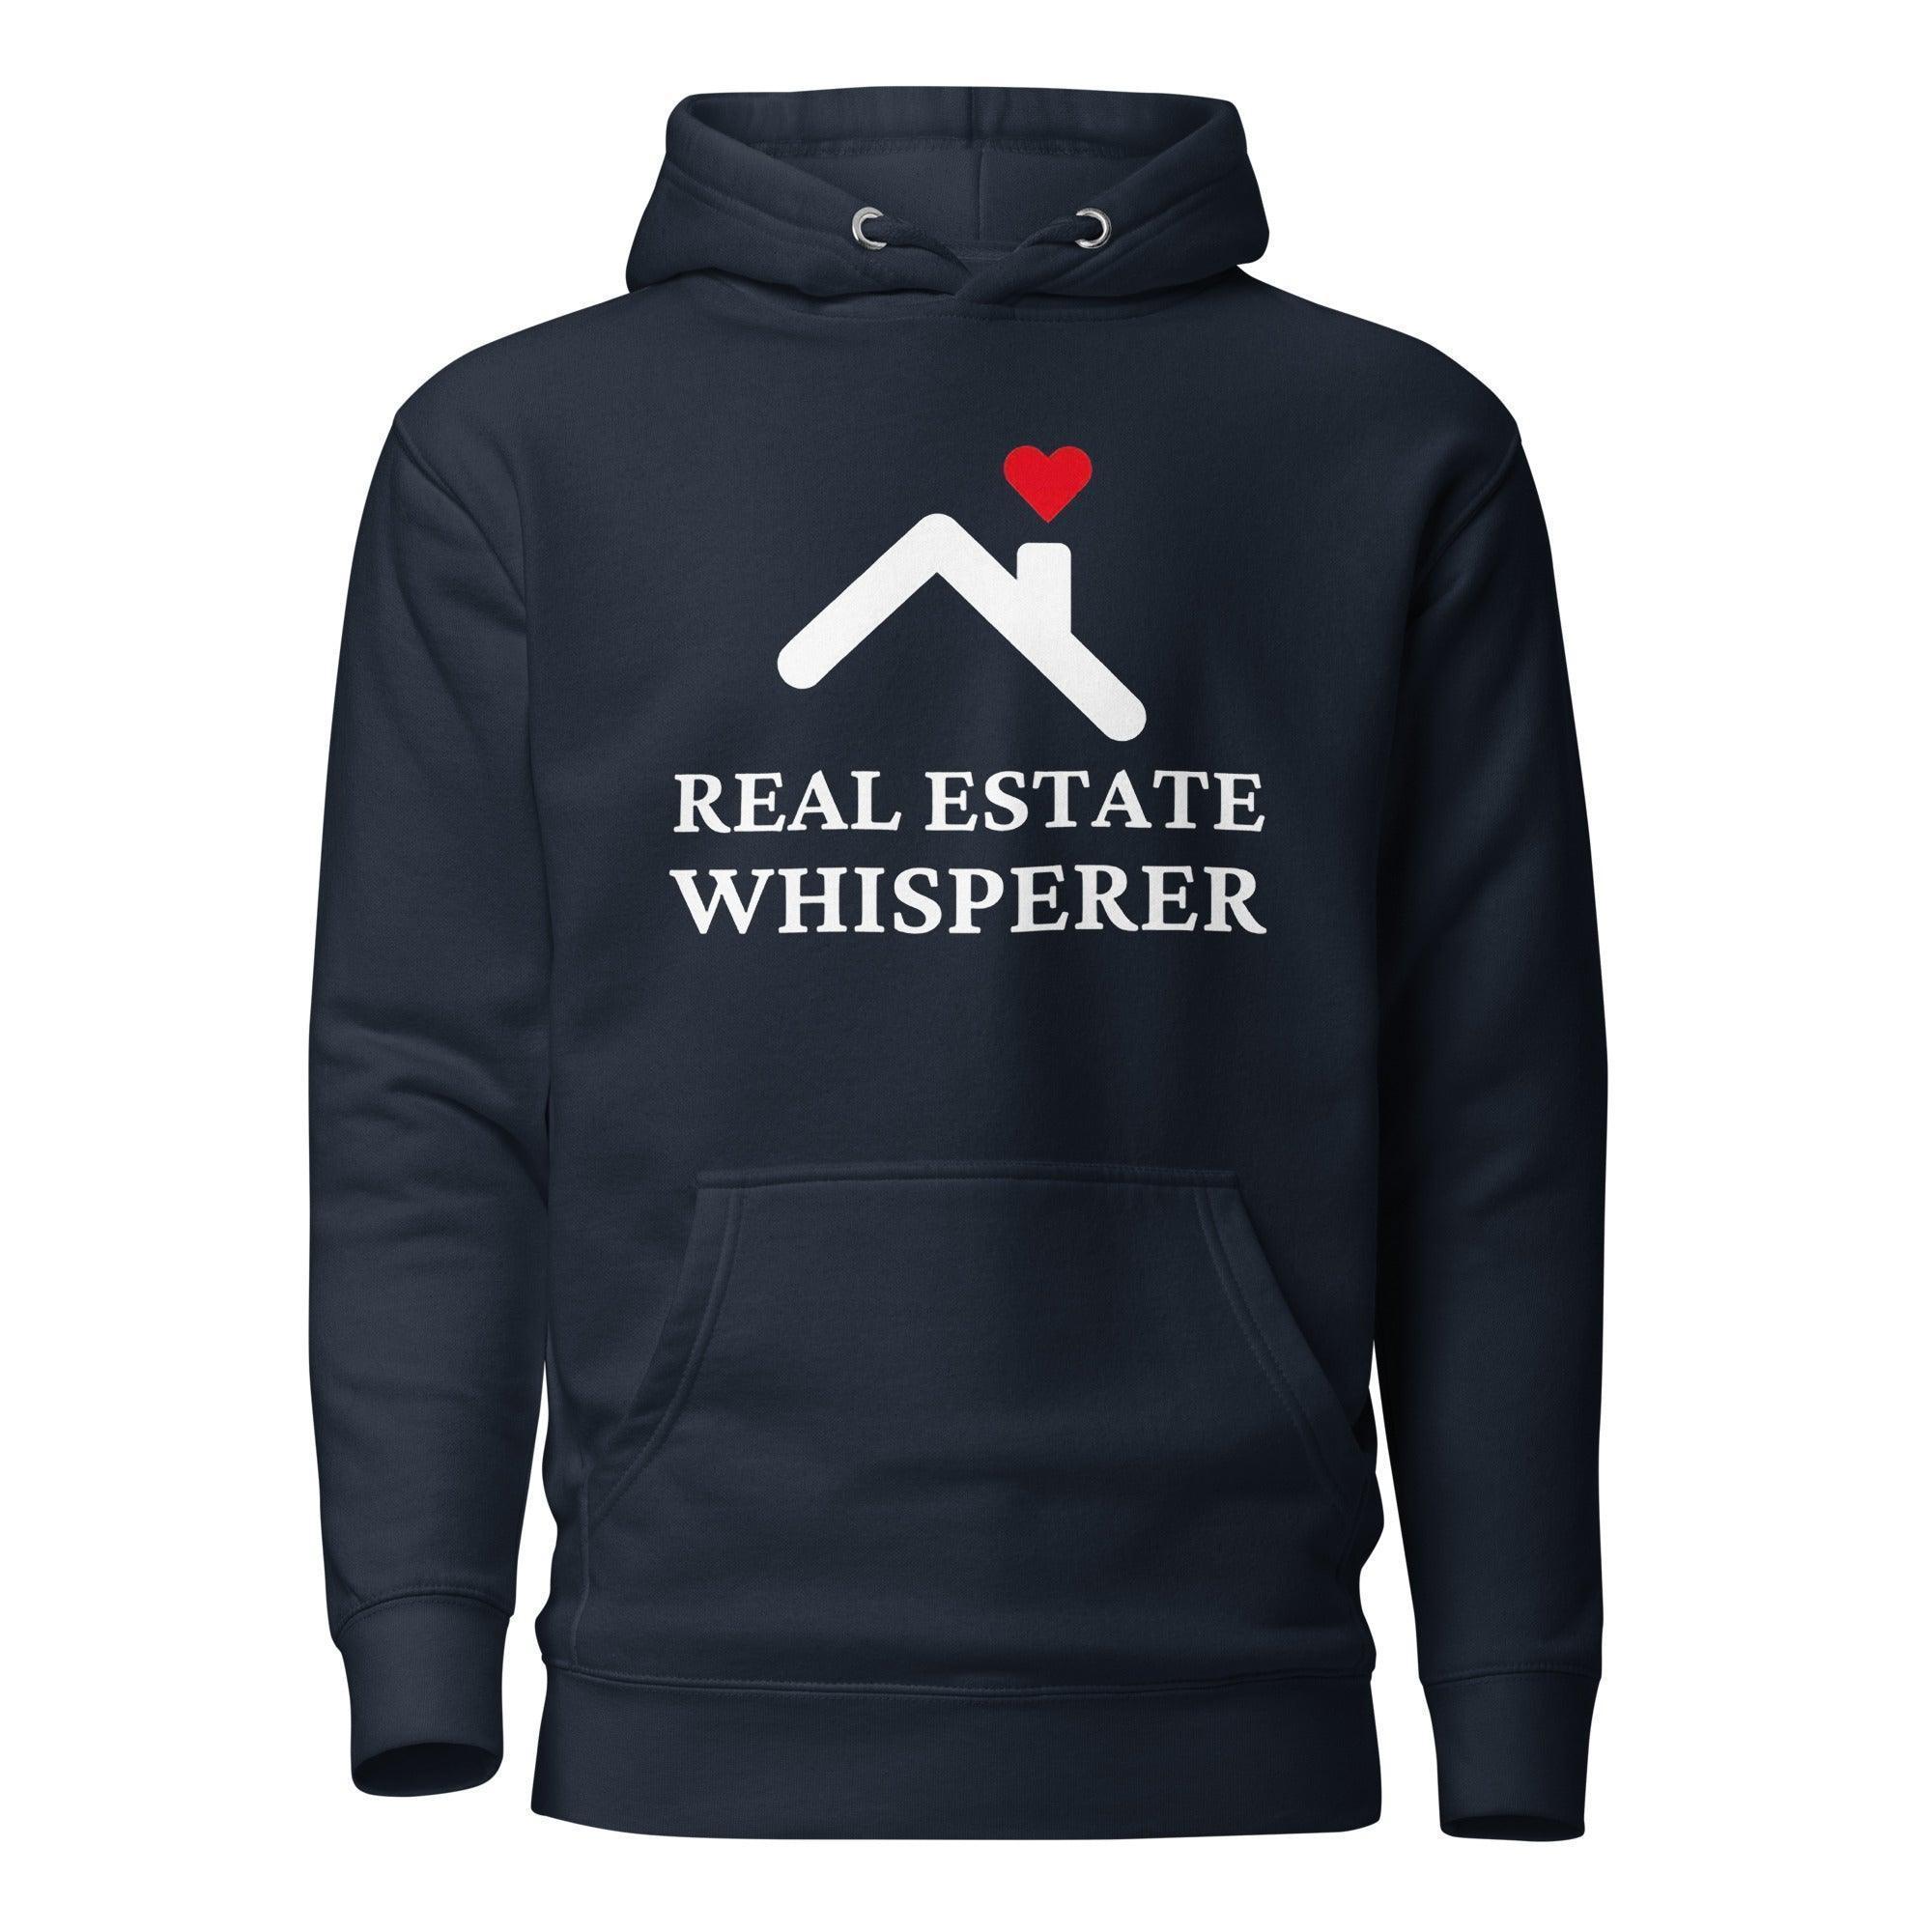 Real Estate Whisperer Pullover Hoodie - InvestmenTees